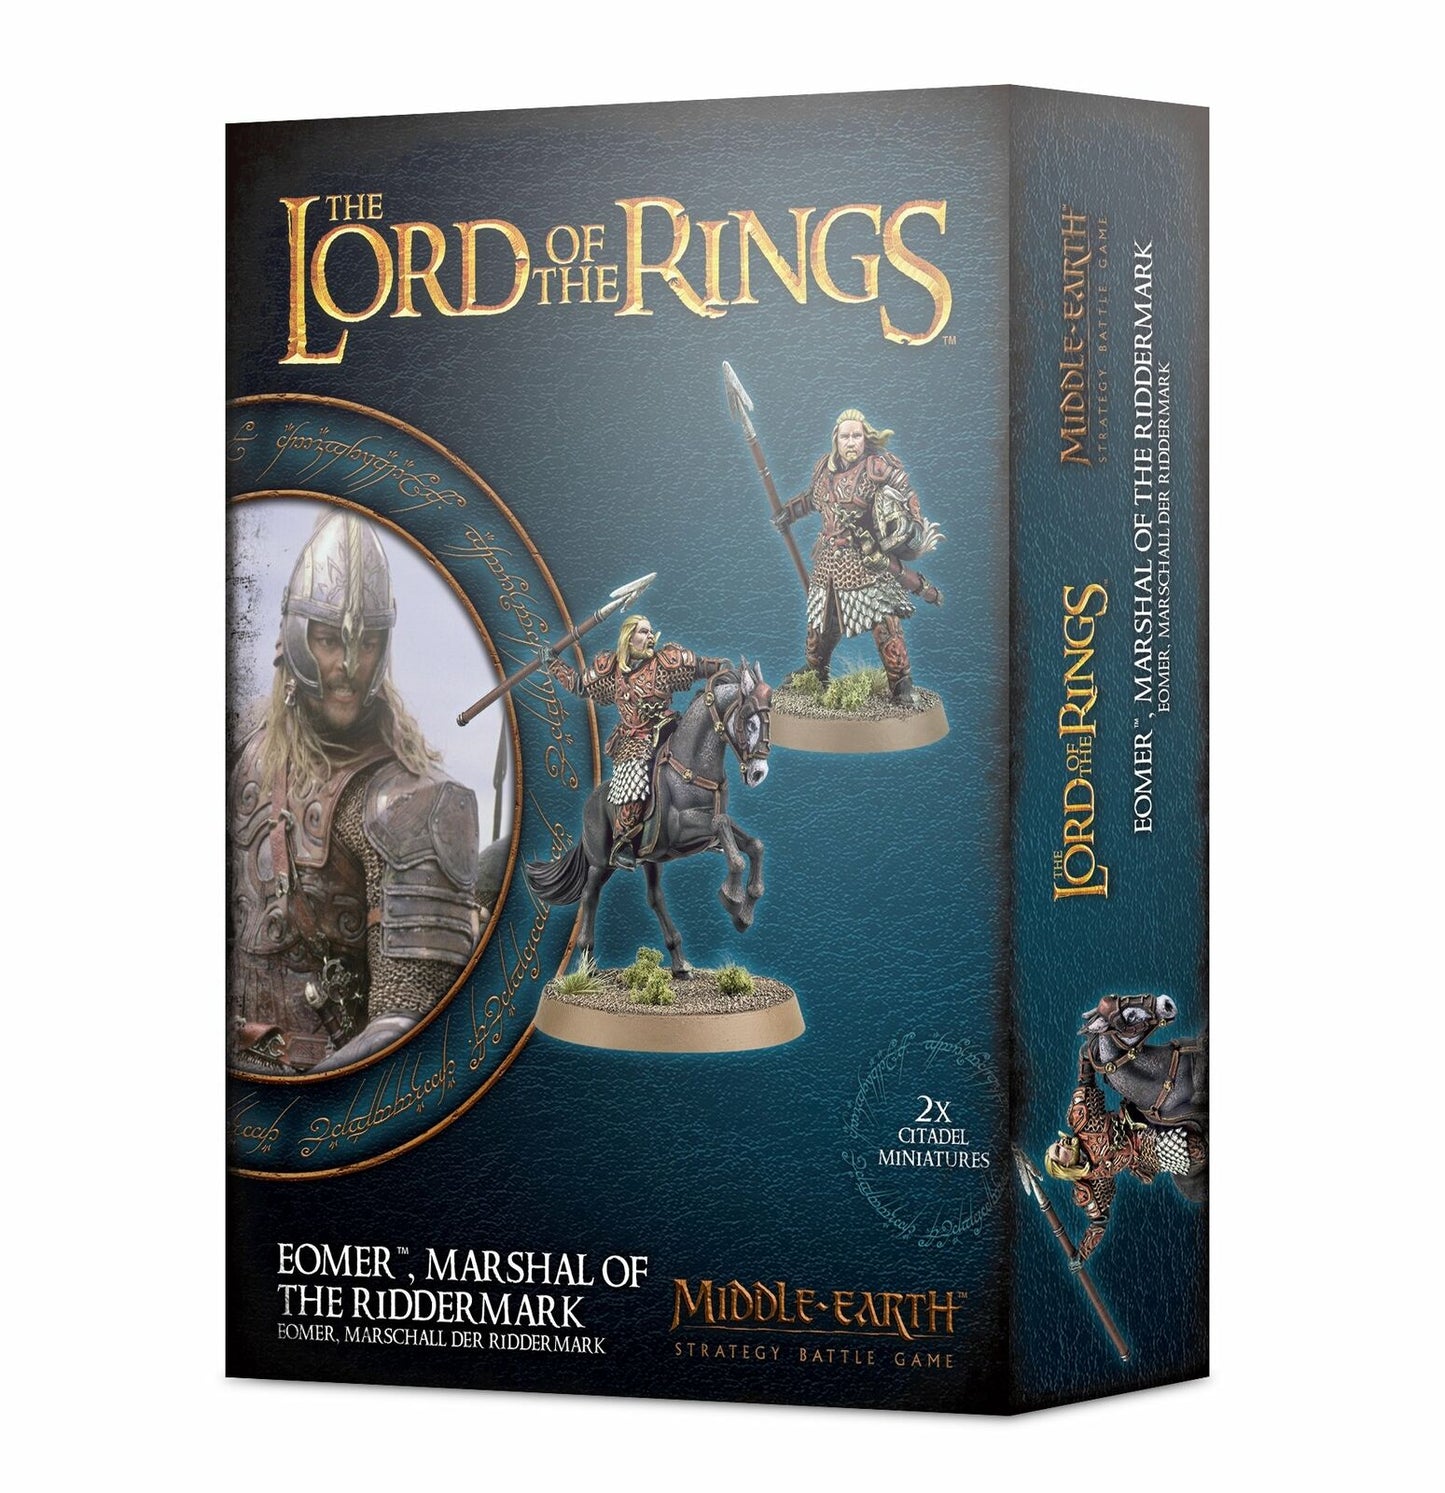 Discount The Lord of the Rings Eomer, Marshal of the Riddermark - West Coast Games